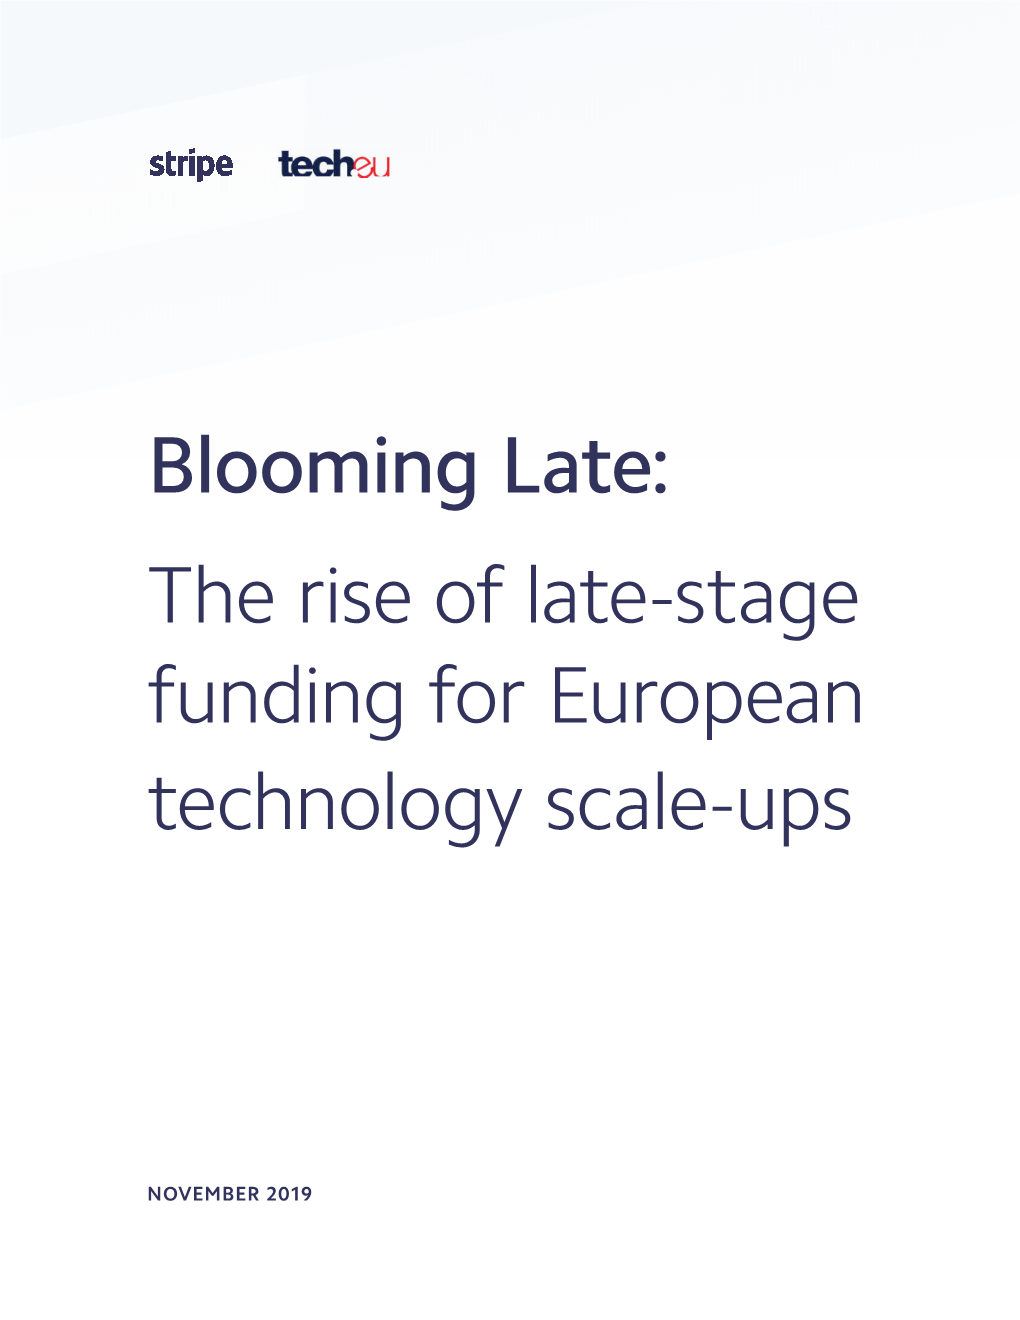 The Rise of Late-Stage Funding for European Technology Scale-Ups